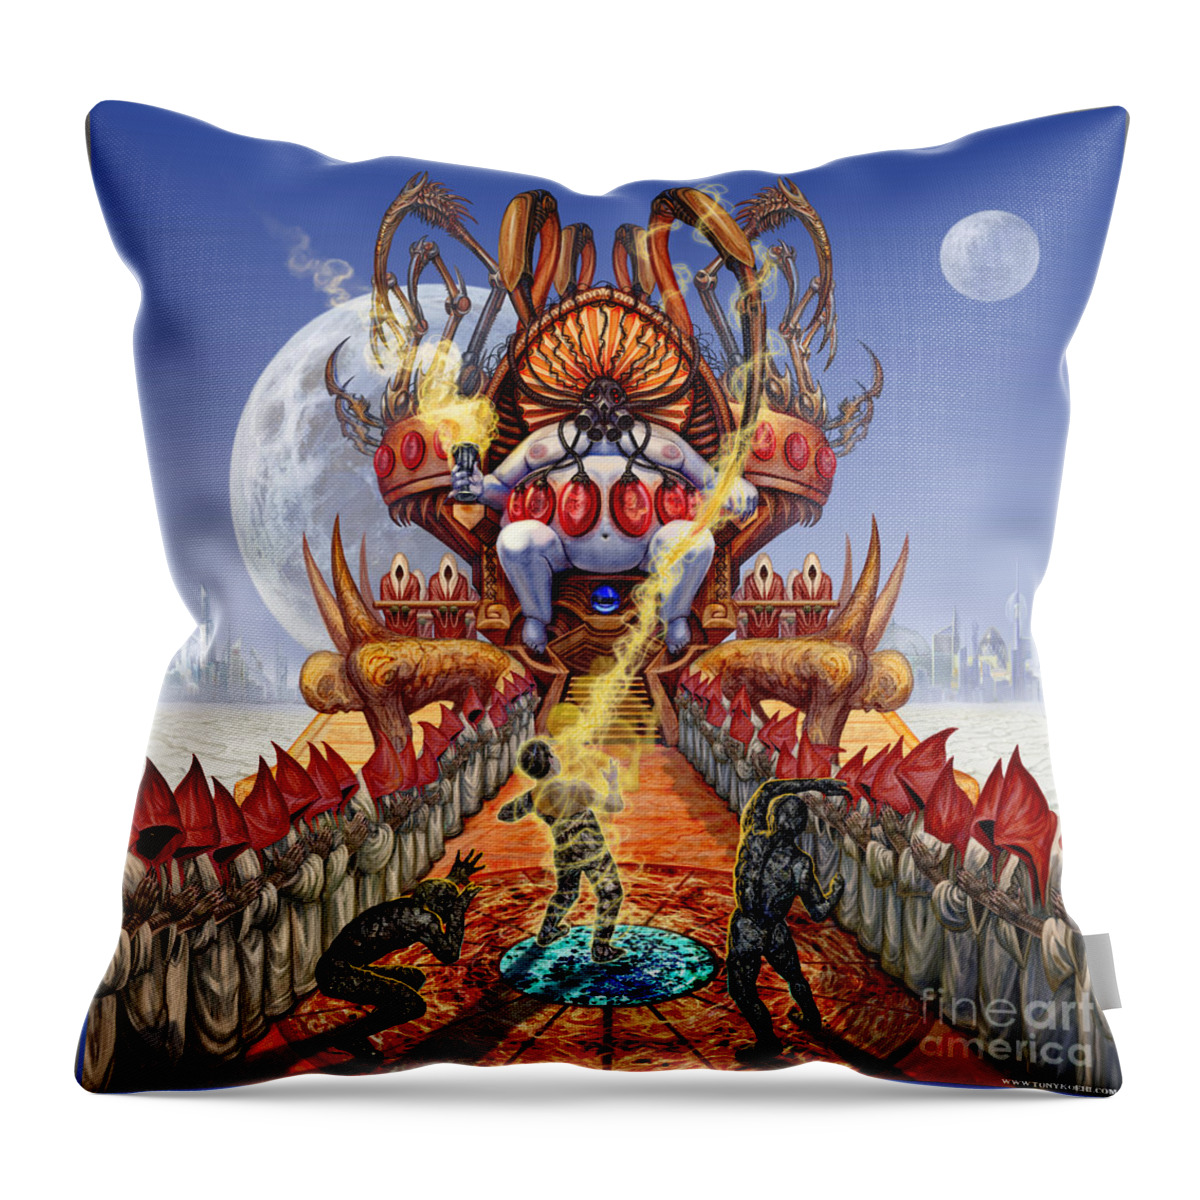 Fantasy Art Throw Pillow featuring the mixed media Powerless To Power by Tony Koehl